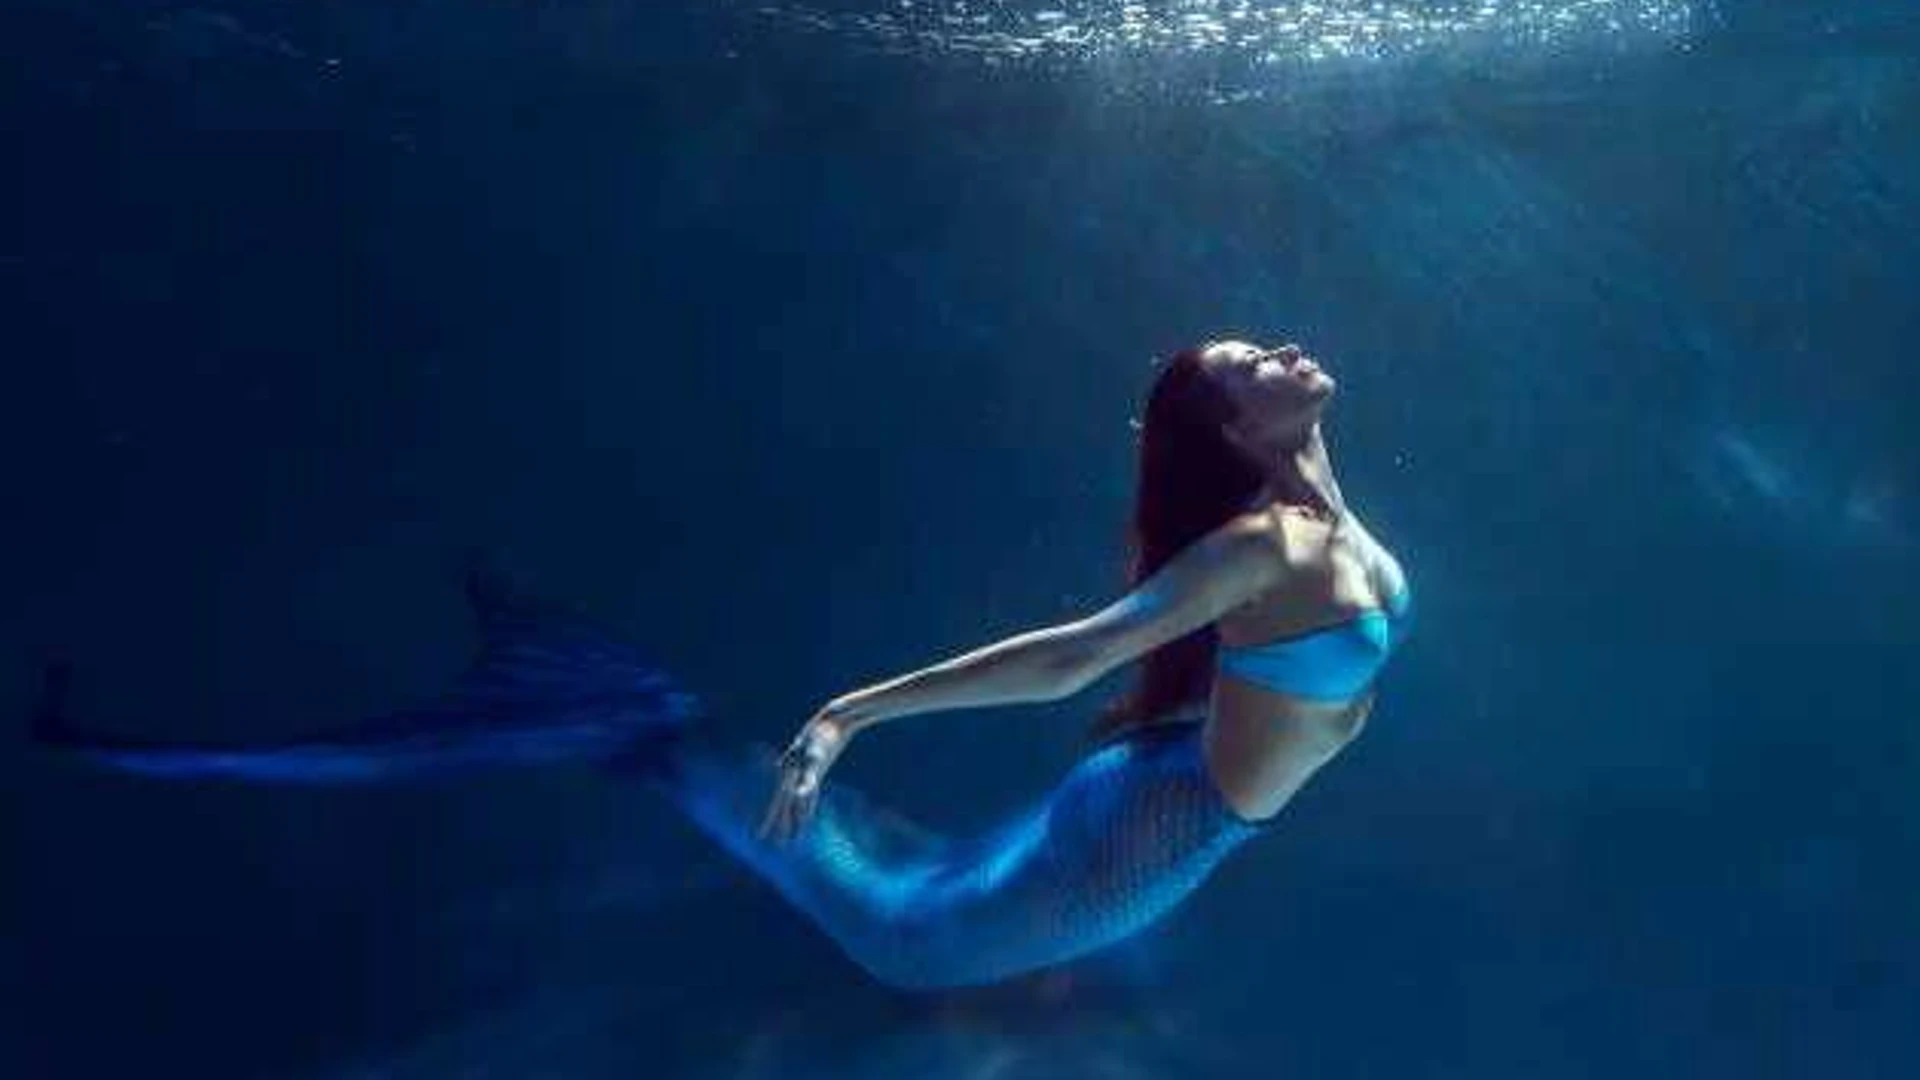 Dreamed of becoming a mermaid? Florida Springs is the place to be